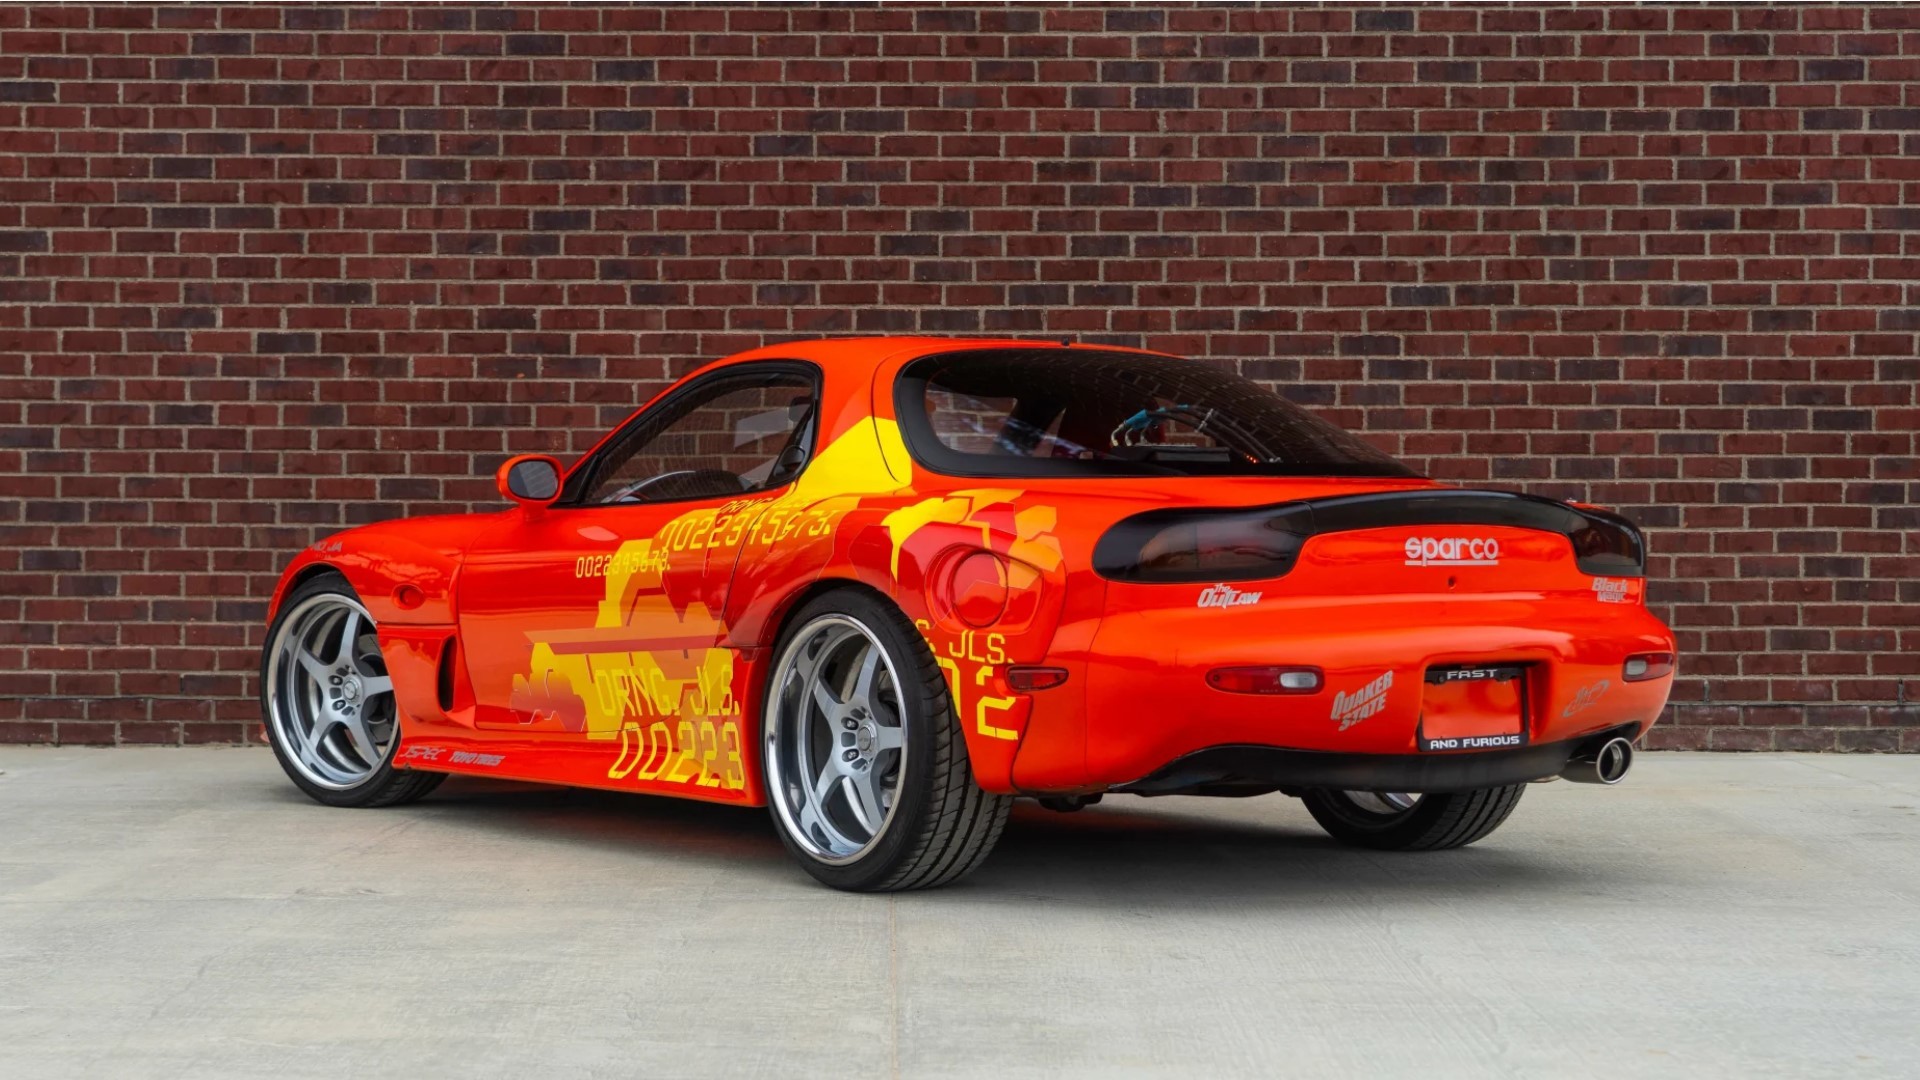 The Original 'Fast and Furious' RX-7 Goes for Sale With a Built-In ...